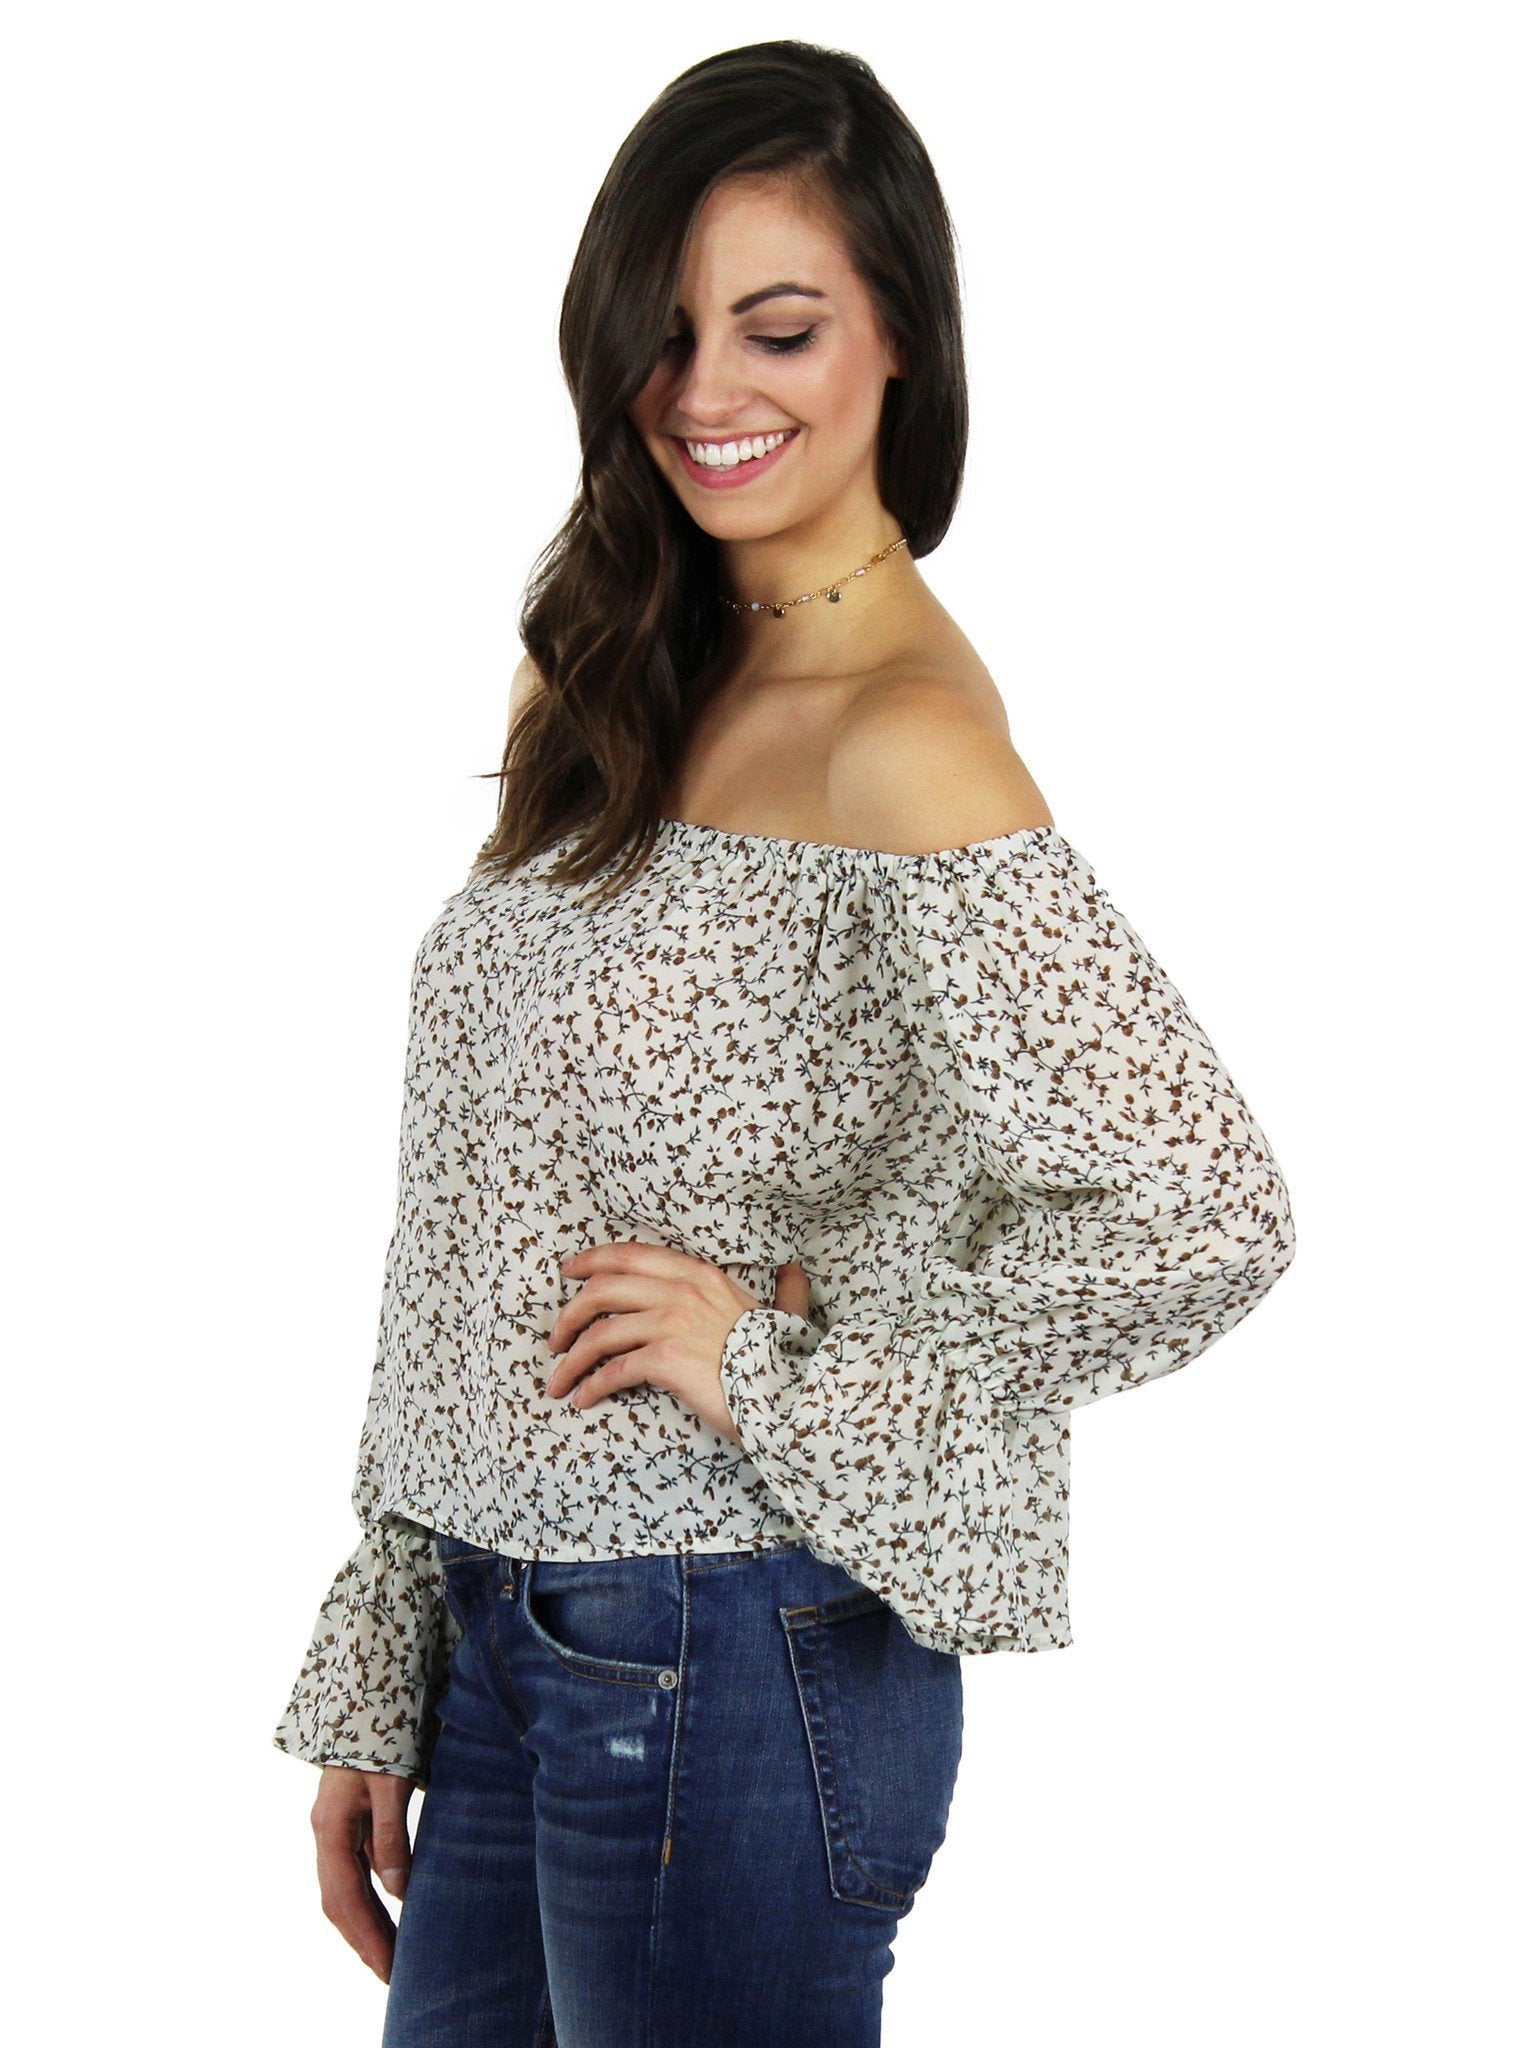 Women wearing a top rental from Lucca Couture called Off Shoulder Ruffle Sleeve Top